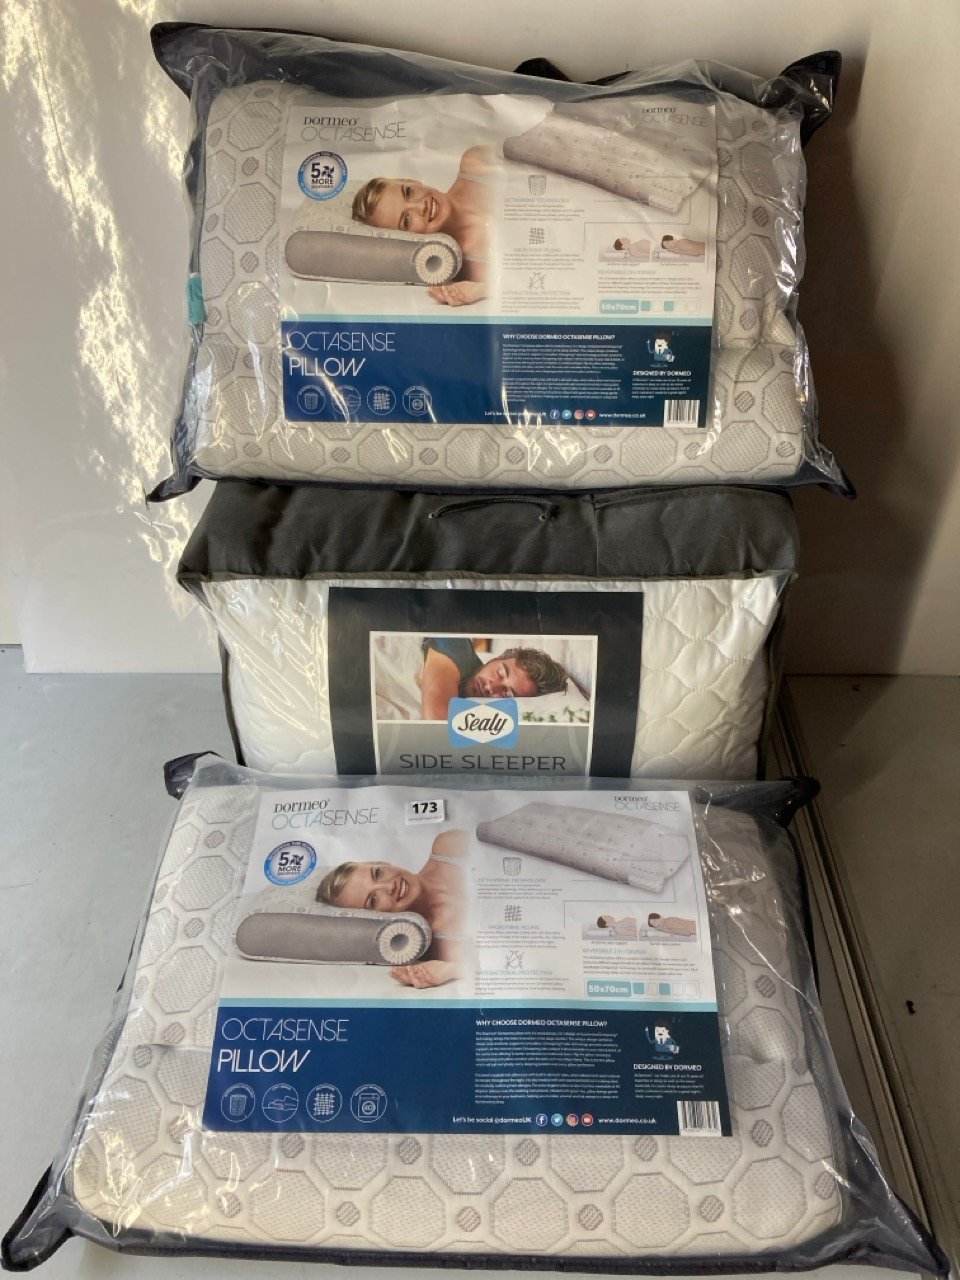 2 X DORMEO OCTASENSE PILLOWS TOGETHER WITH 2 X BATHROOM MATS